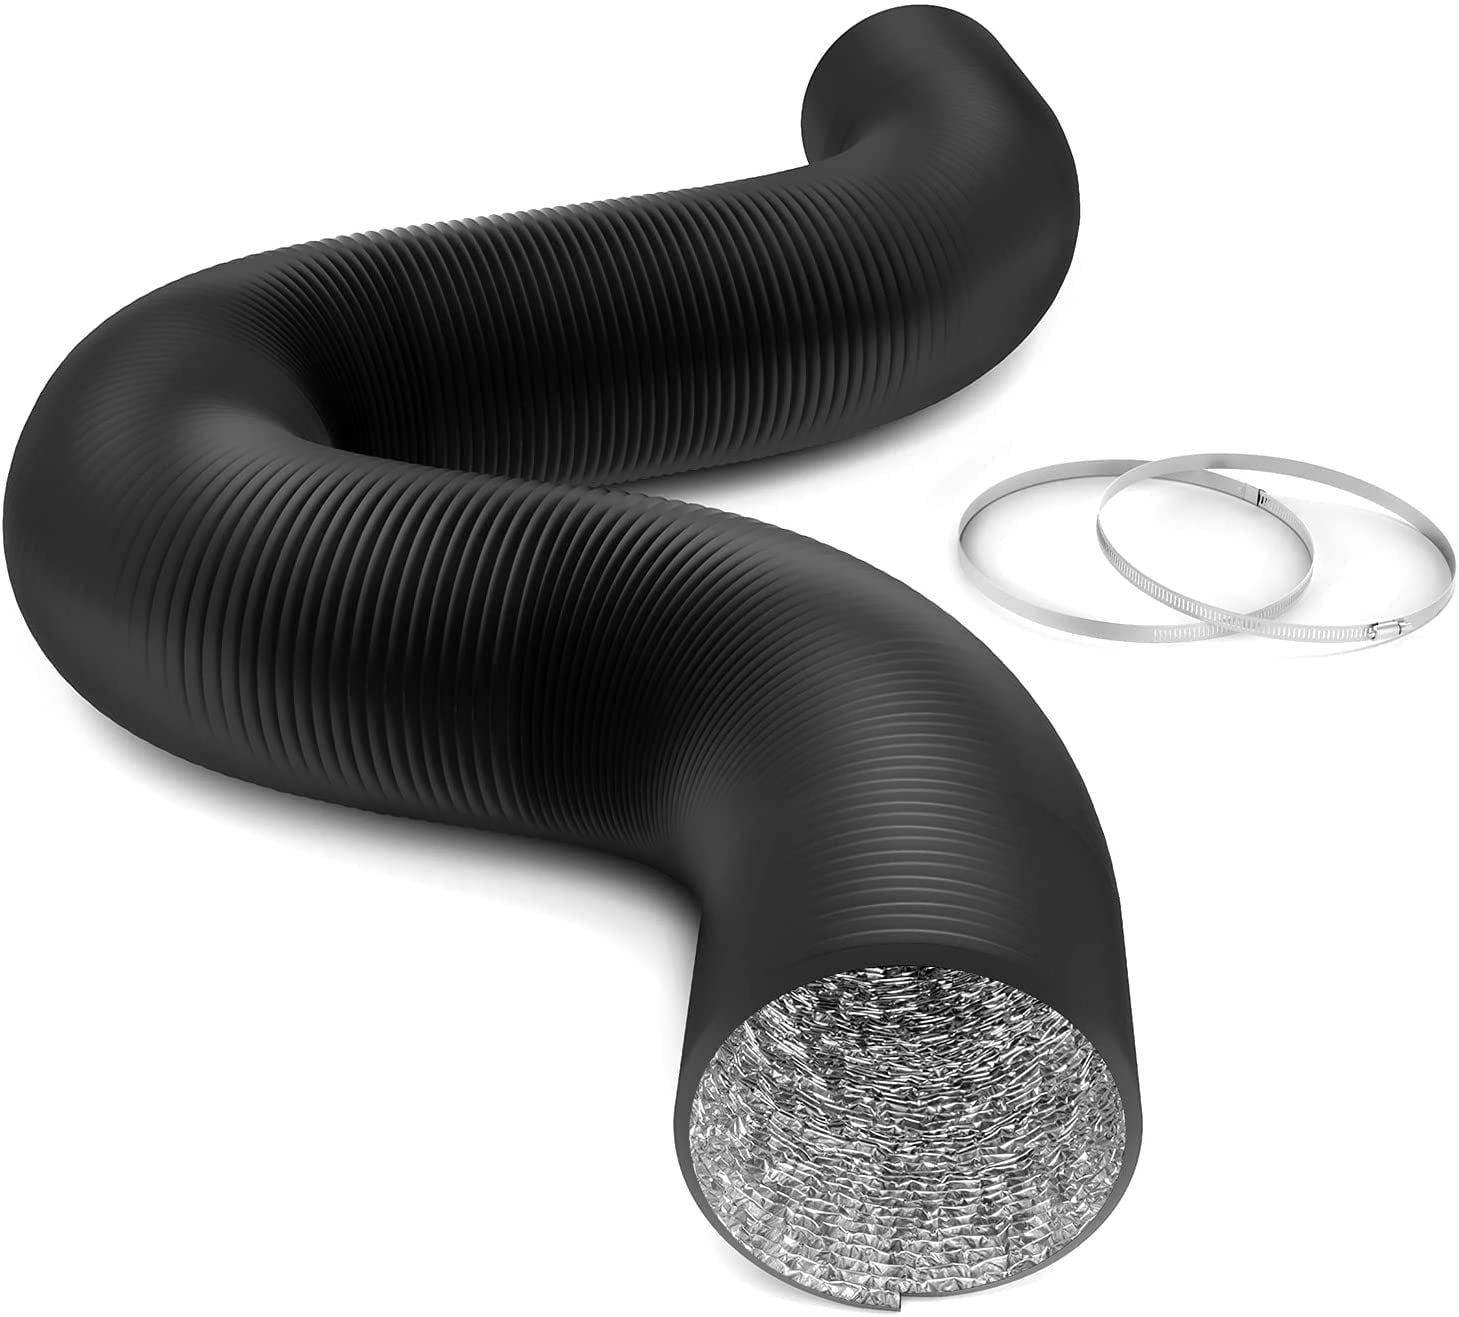 10" Inch x 25' Feet BLACK Flexible Ducting w/ 2 Clamps for Air Ventilation 